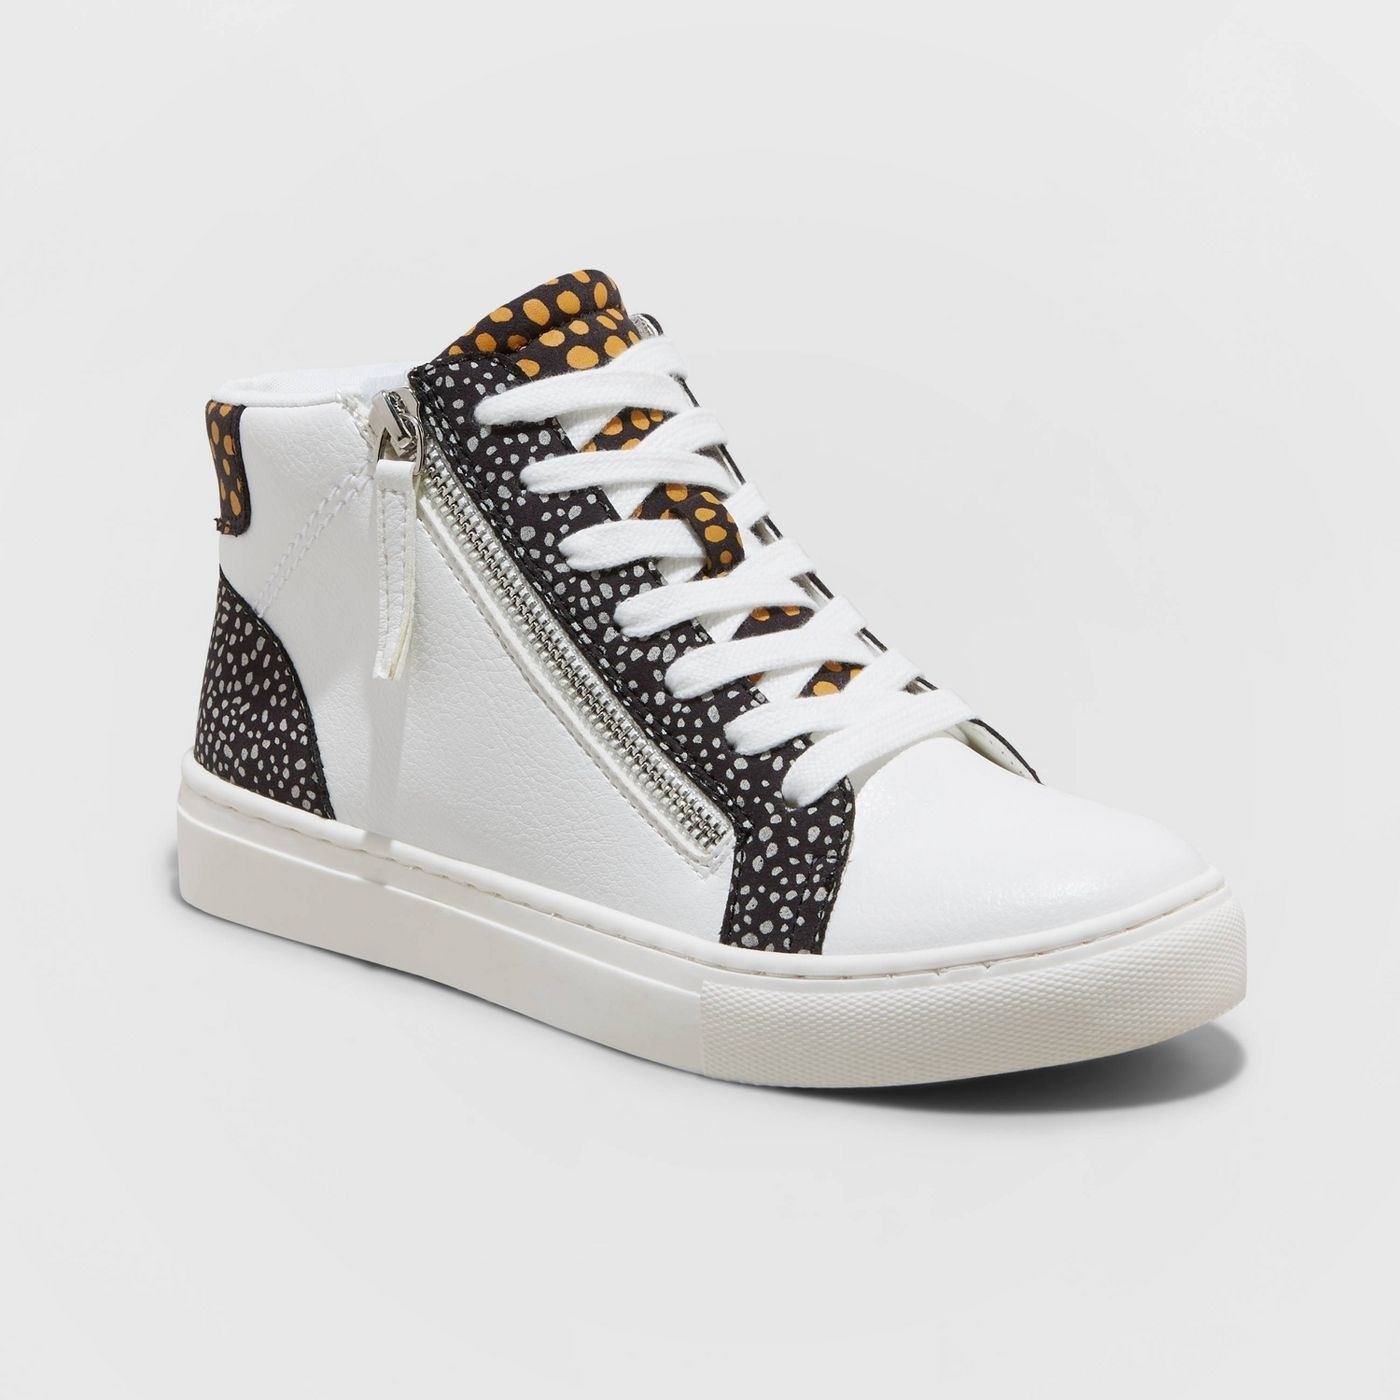 white hightop sneaker with zipper and accent patterns